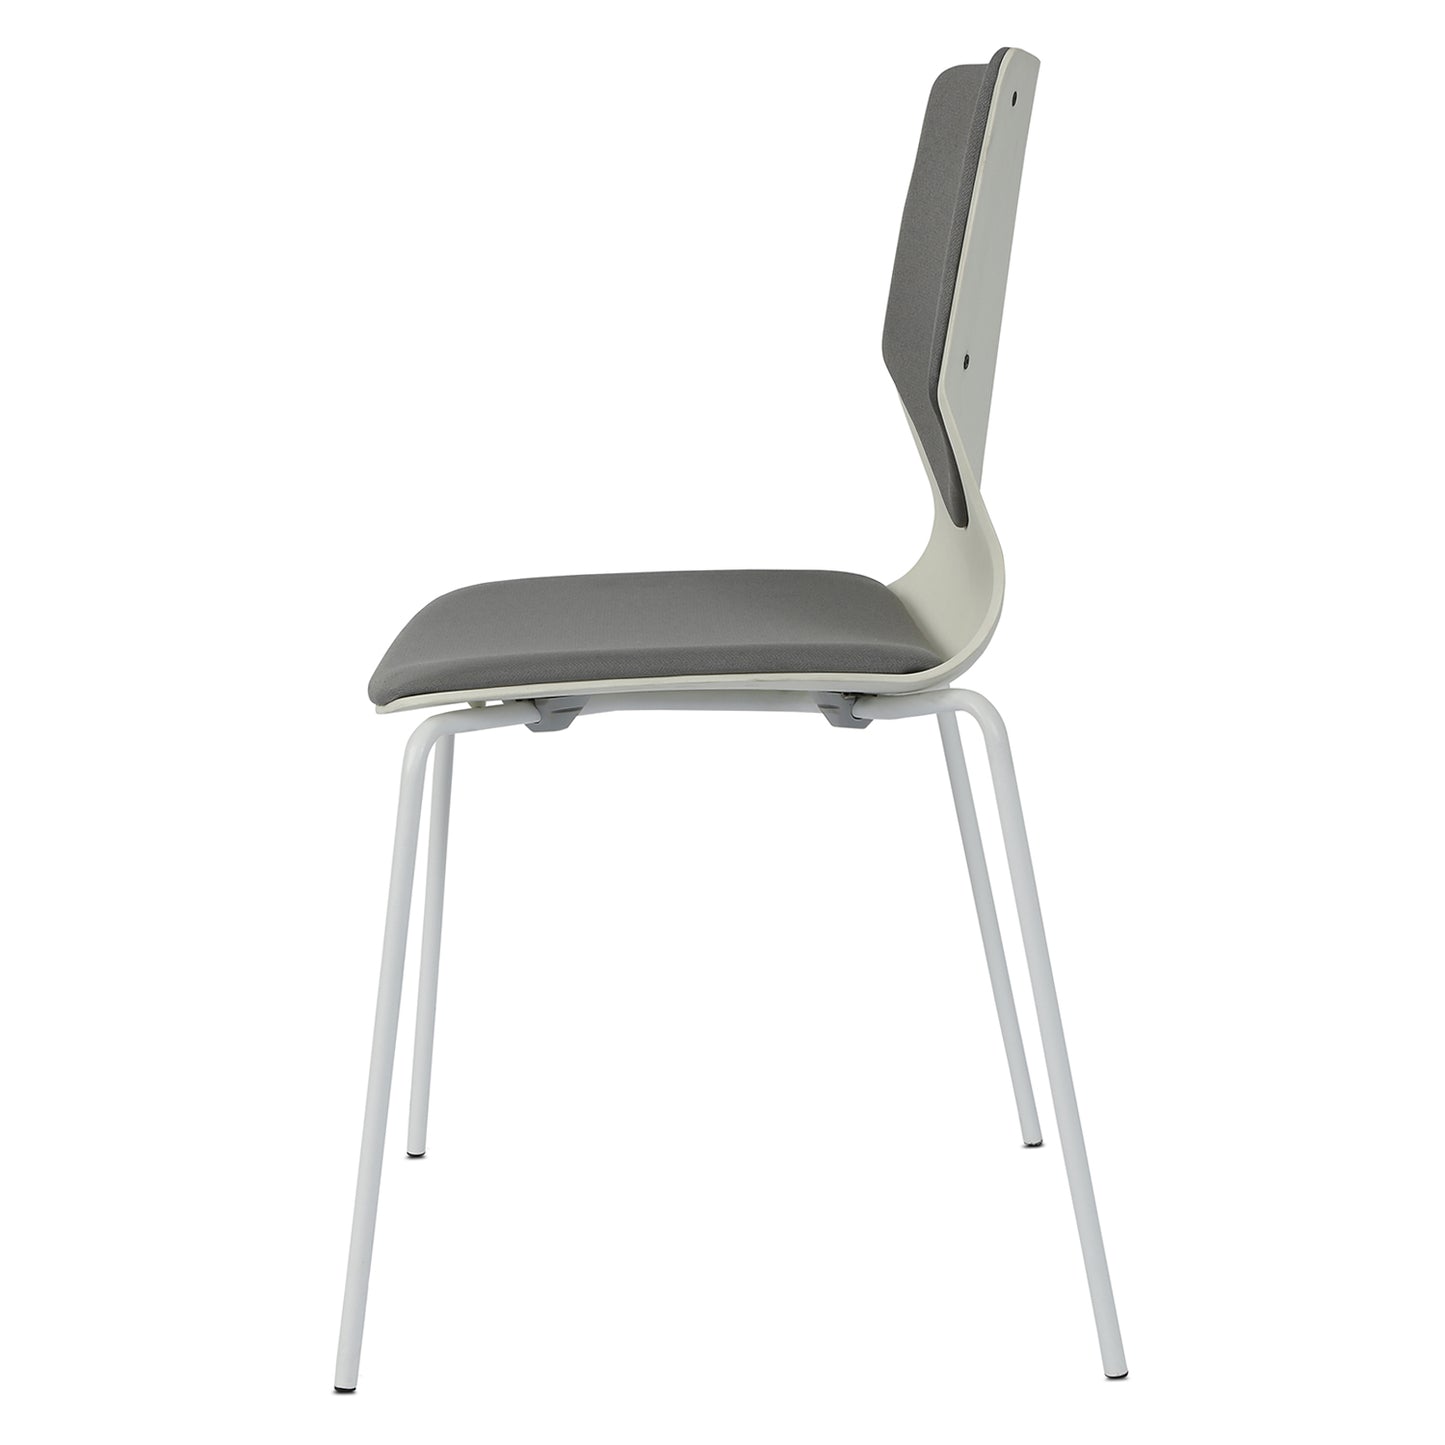 Zing Cafeteria Chair with Seat & Back Cushion